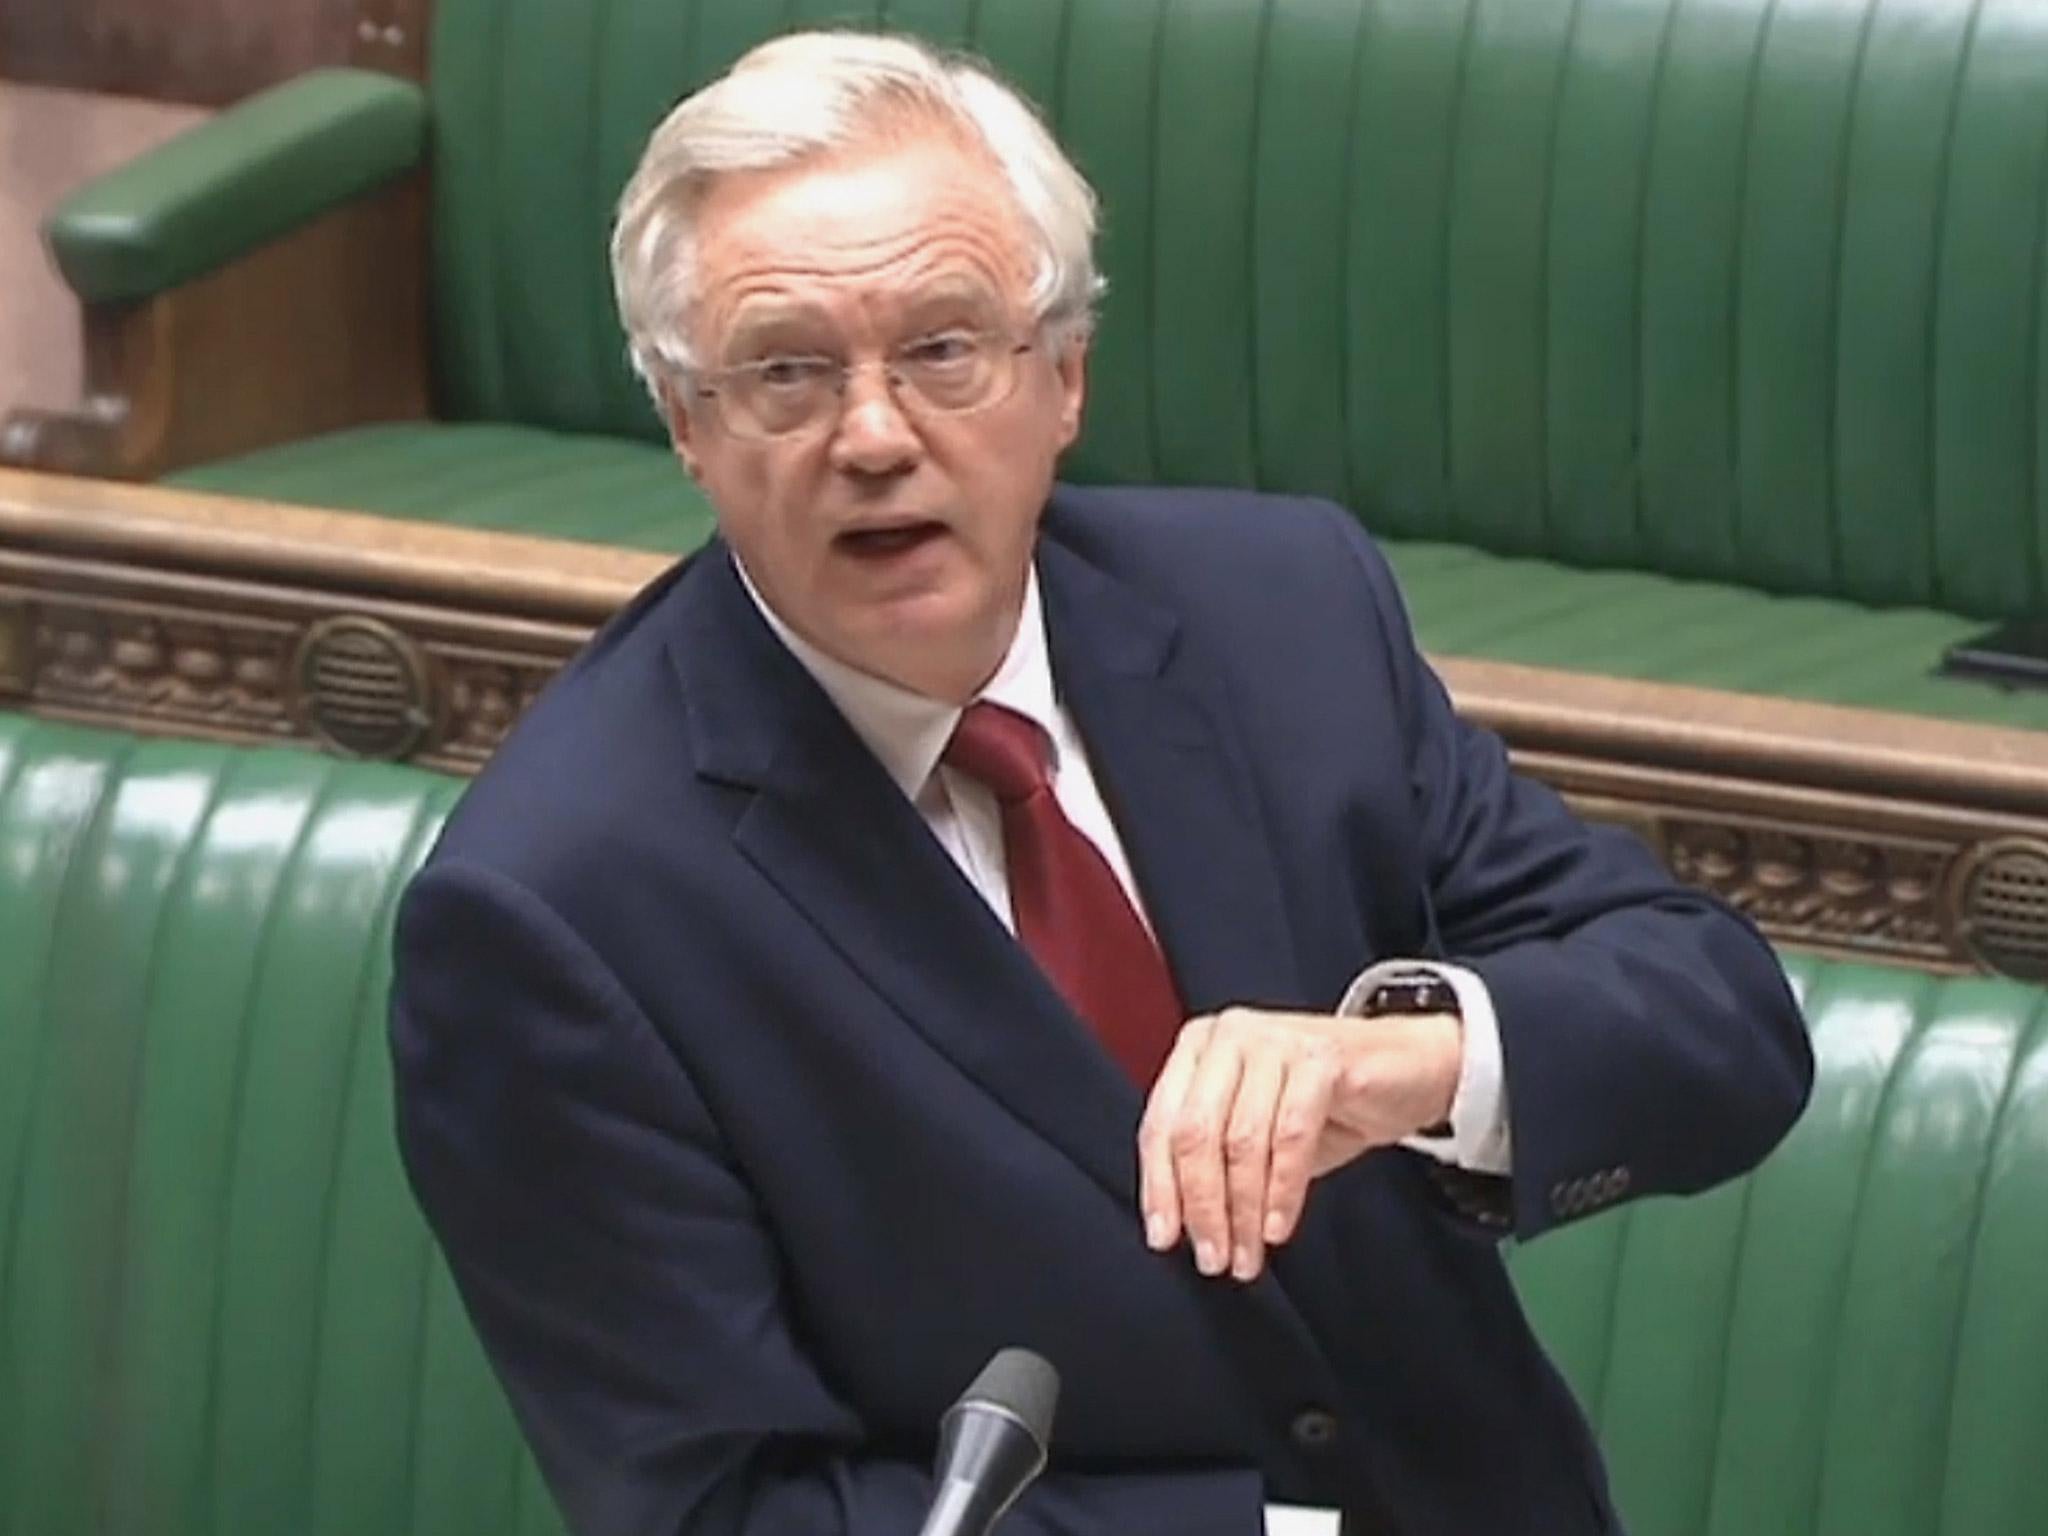 Brexit Secretary David Davis: 'It’s within the power of the House, if it so chooses, to make such resolutions'